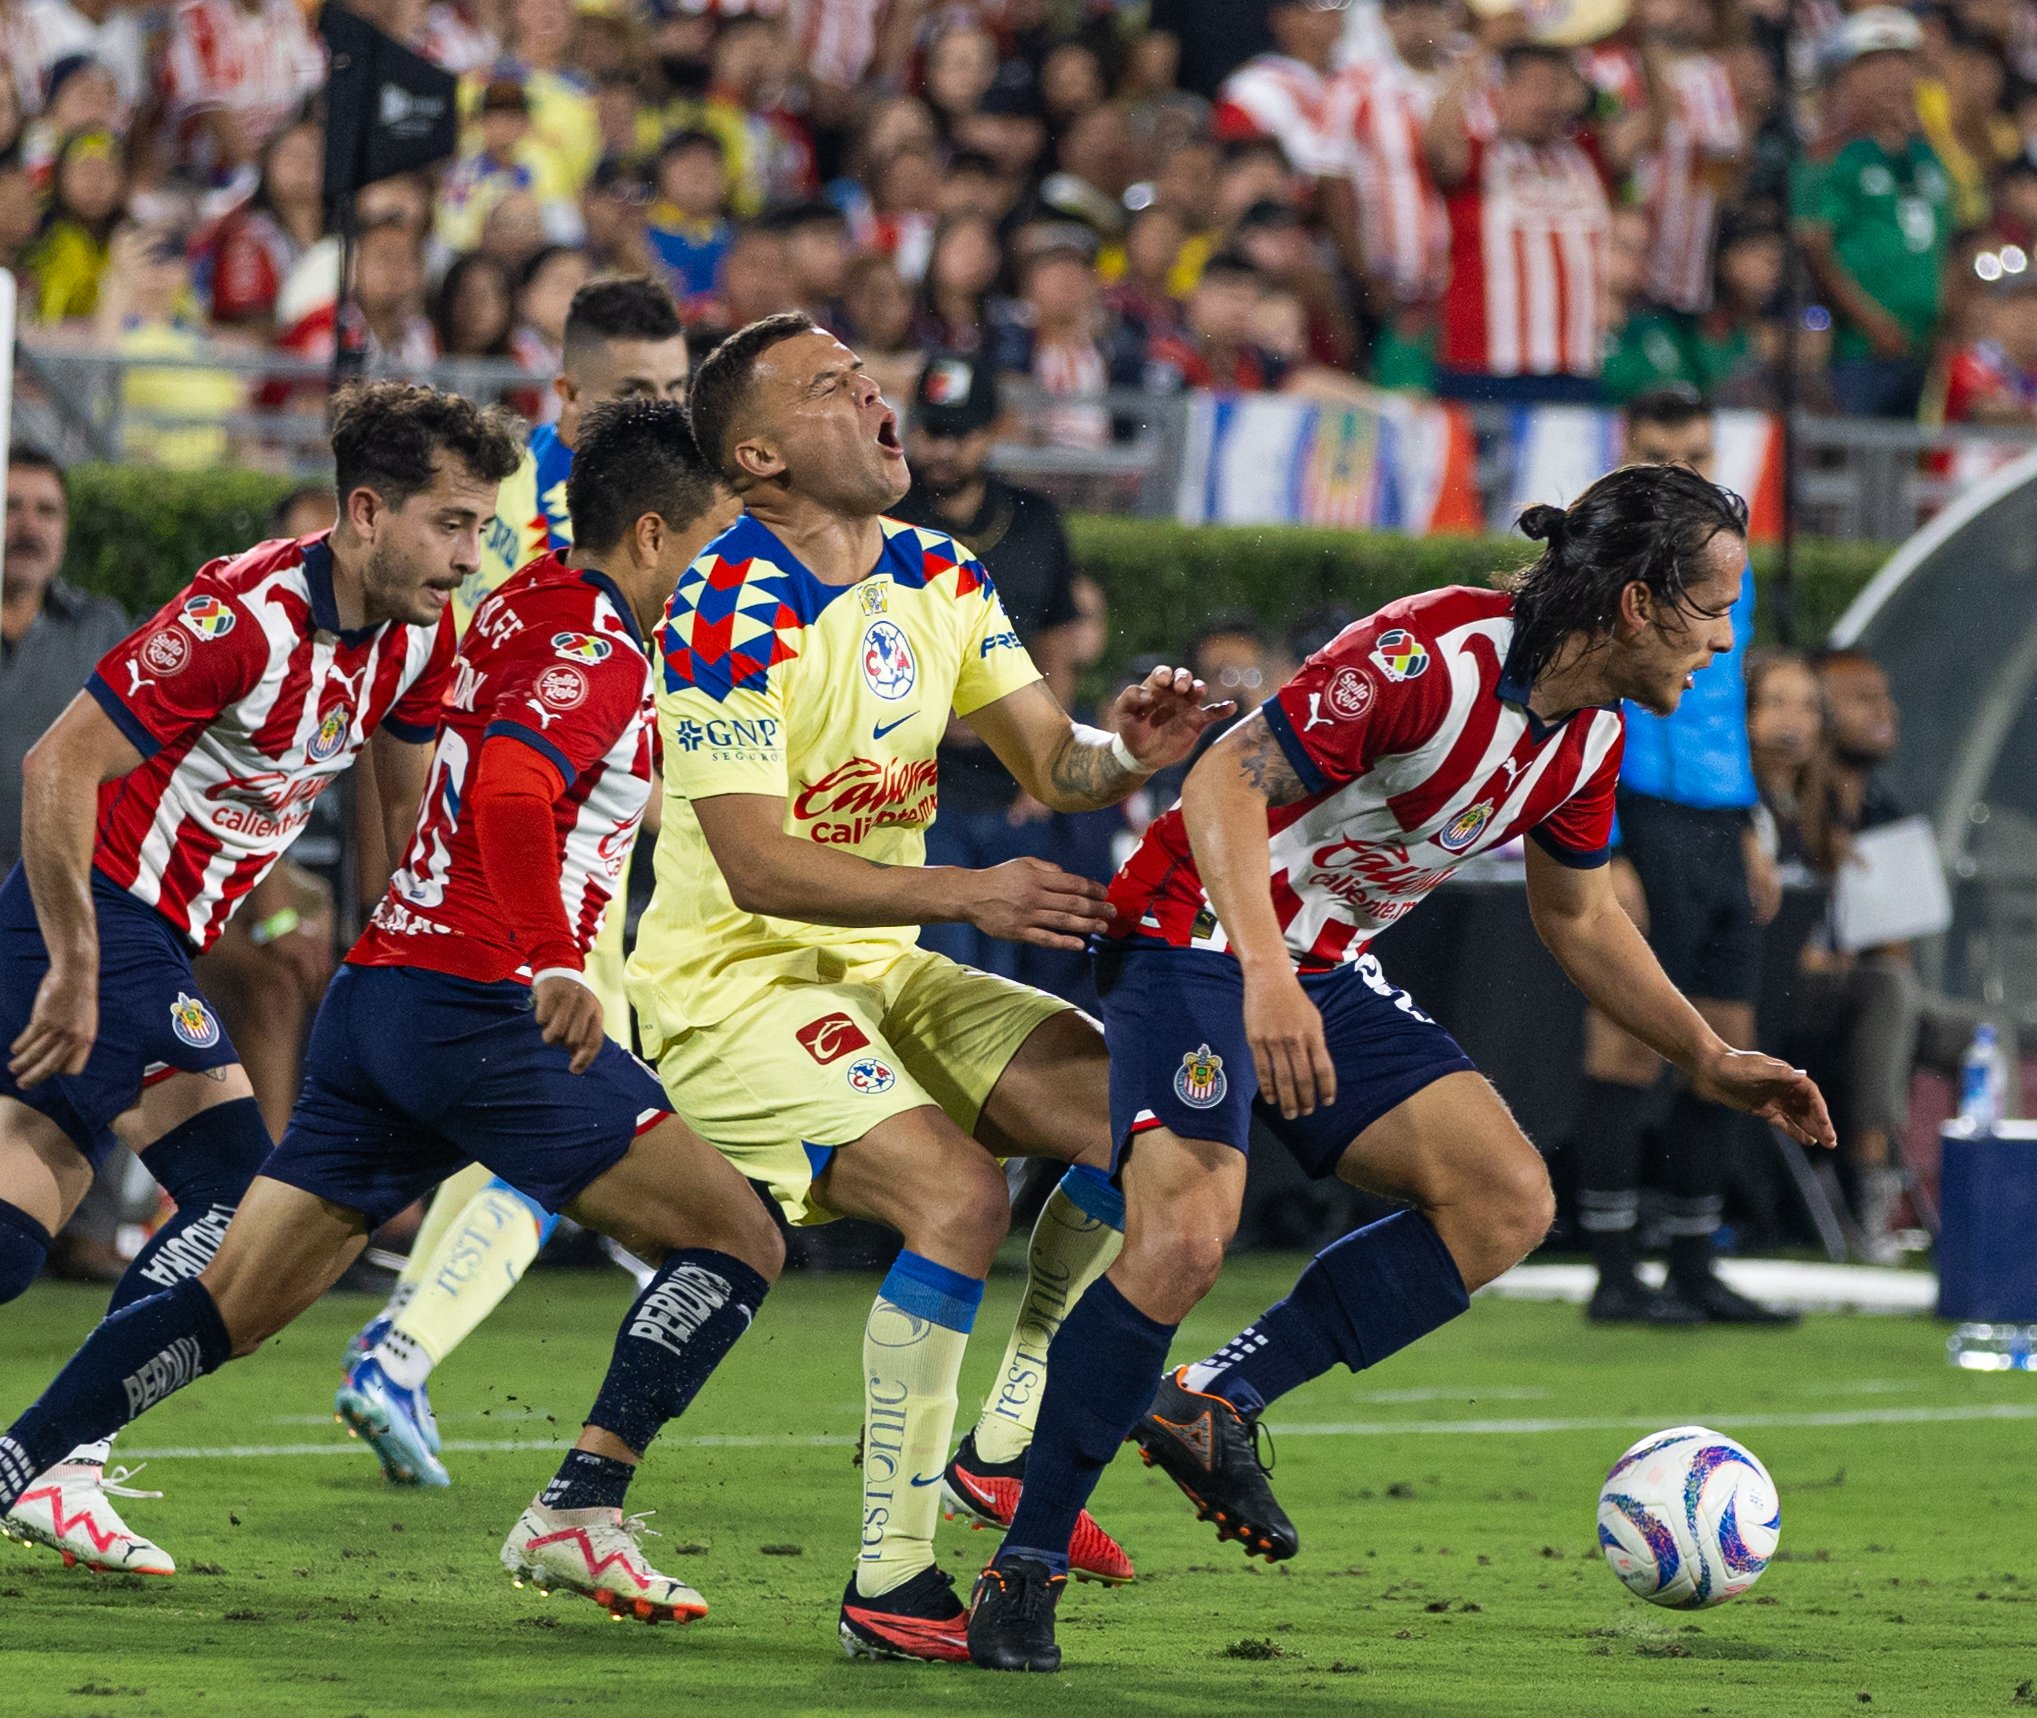  Club America centre-forward Jonathan Rodriguez(L) getting stepped on by C.D. Guadalajara defensive midfielder Fernando Gonzalez(R) during their match at the Rose Bowl in Pasadena, Calif. on Sunday, Oct. 15. (Danilo Perez | The Corsair) 